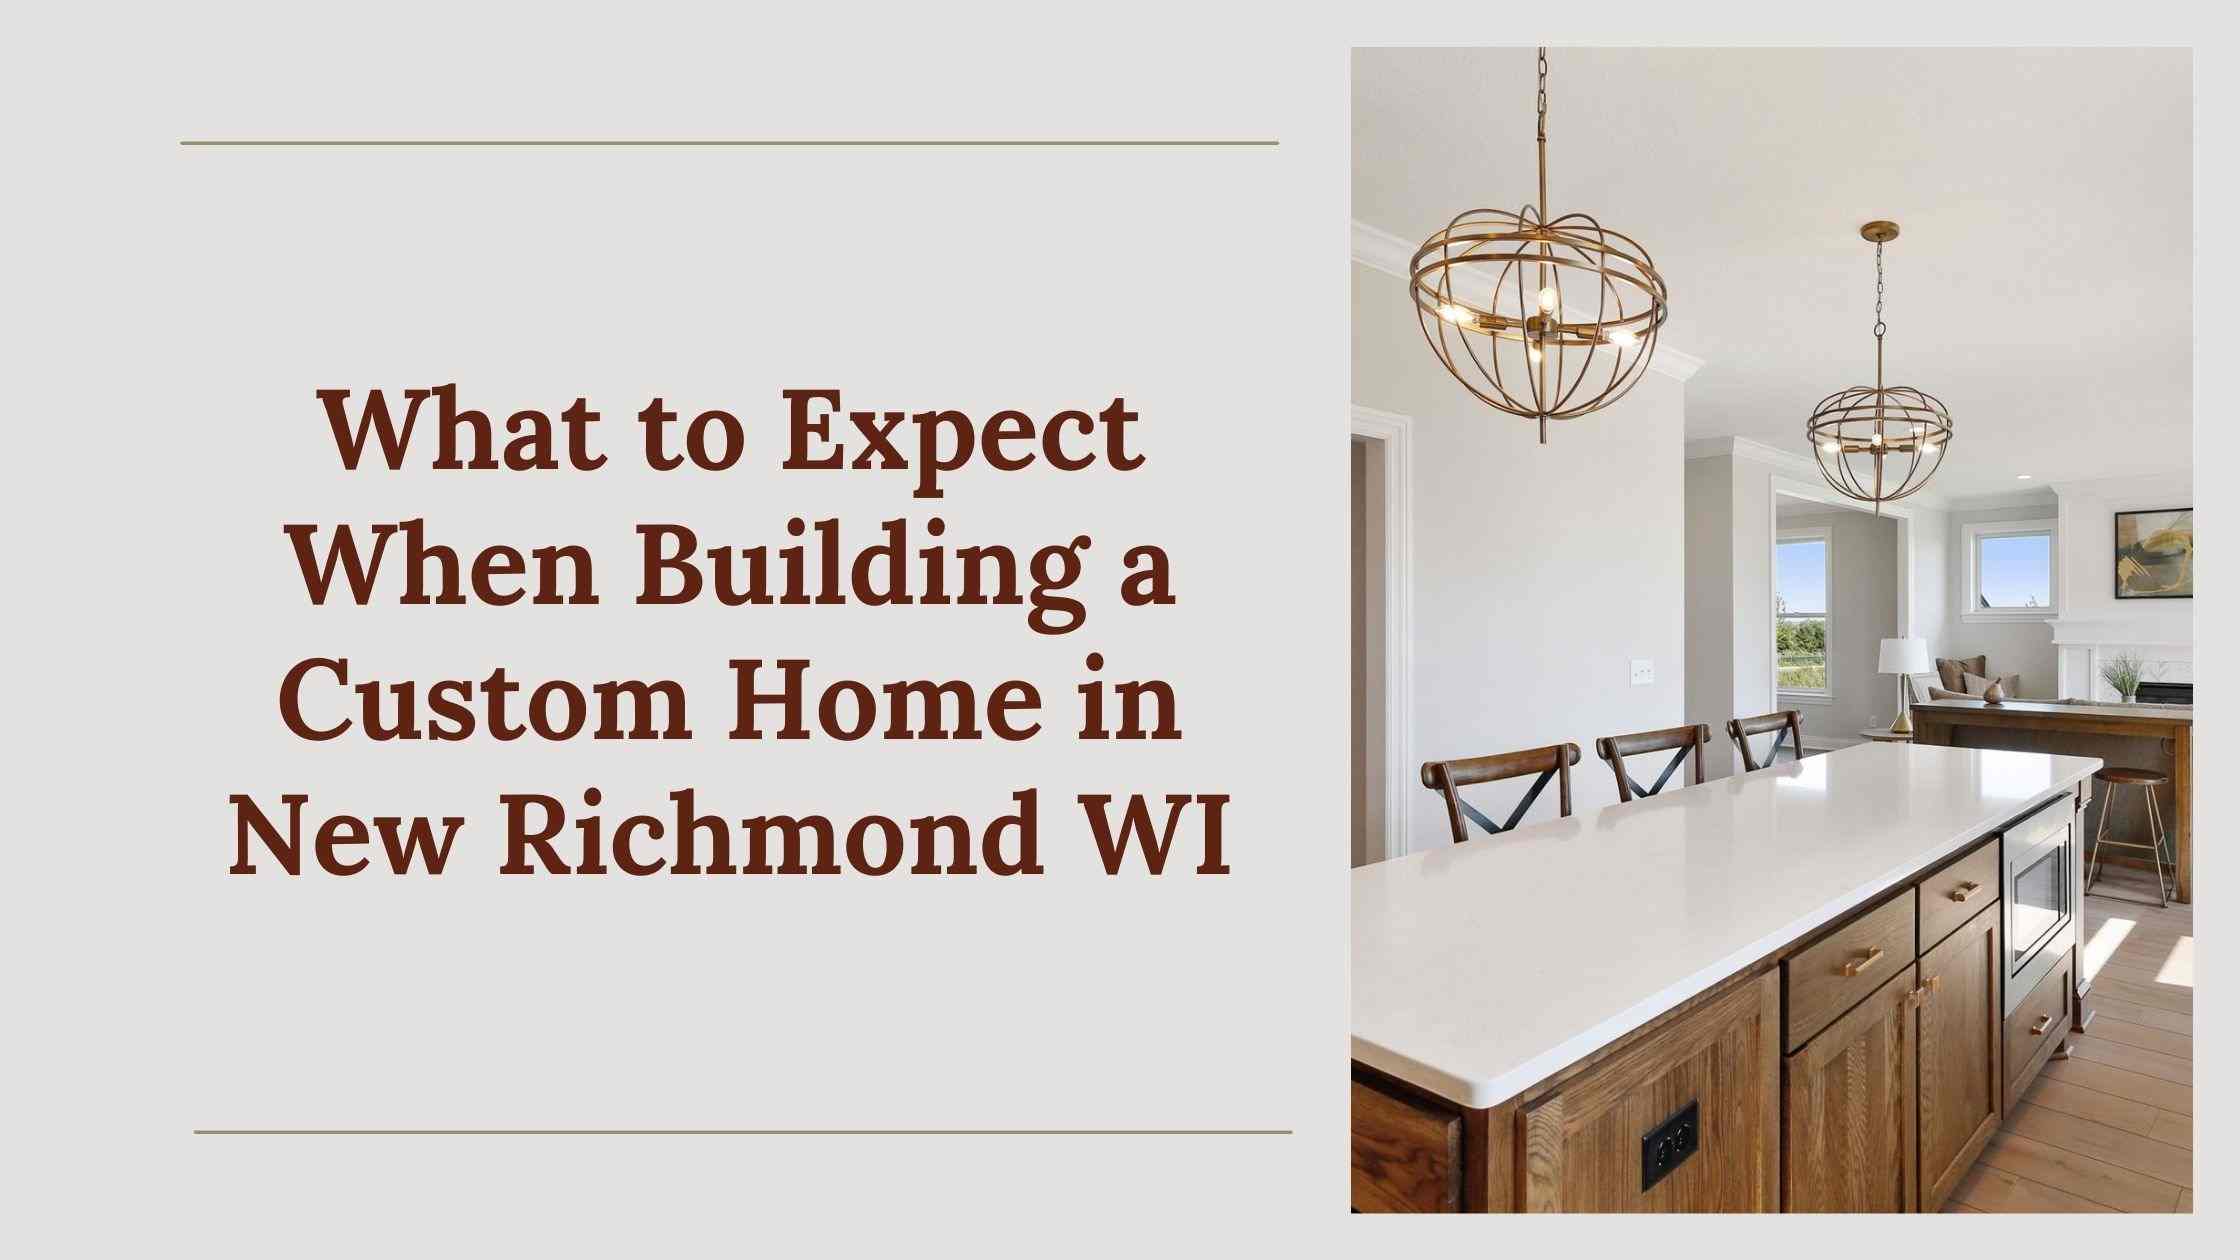 What to Expect When Building a Custom Home in New Richmond WI